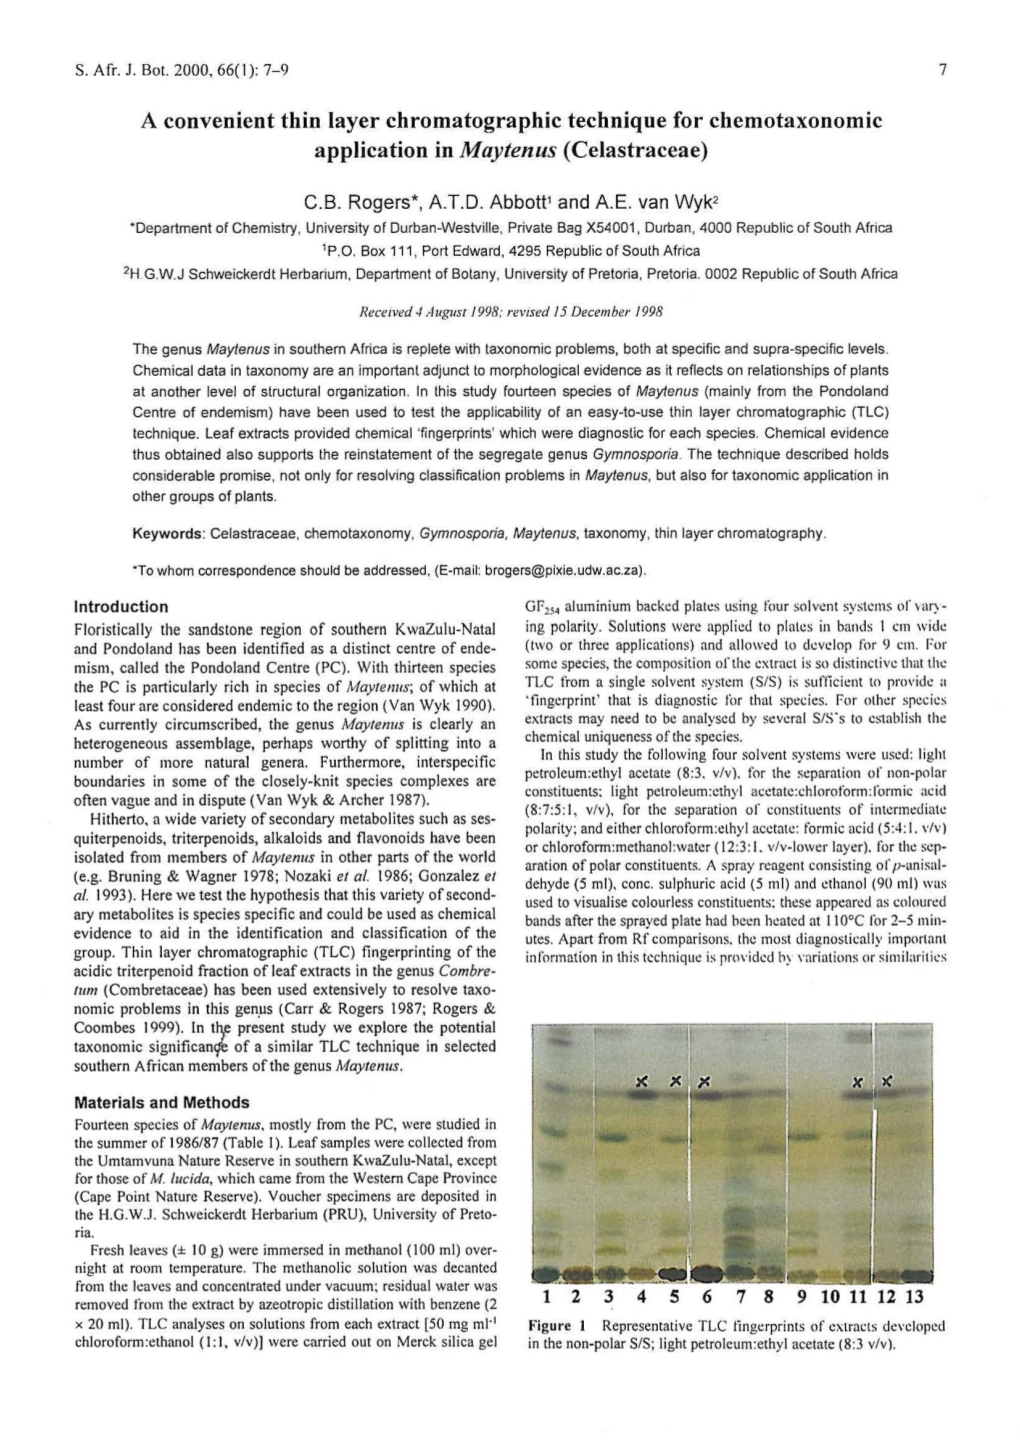 A Convenient Thin Layer Chromatographic Technique for Chemotaxonomic Application in Maytenus (Celastraceae)